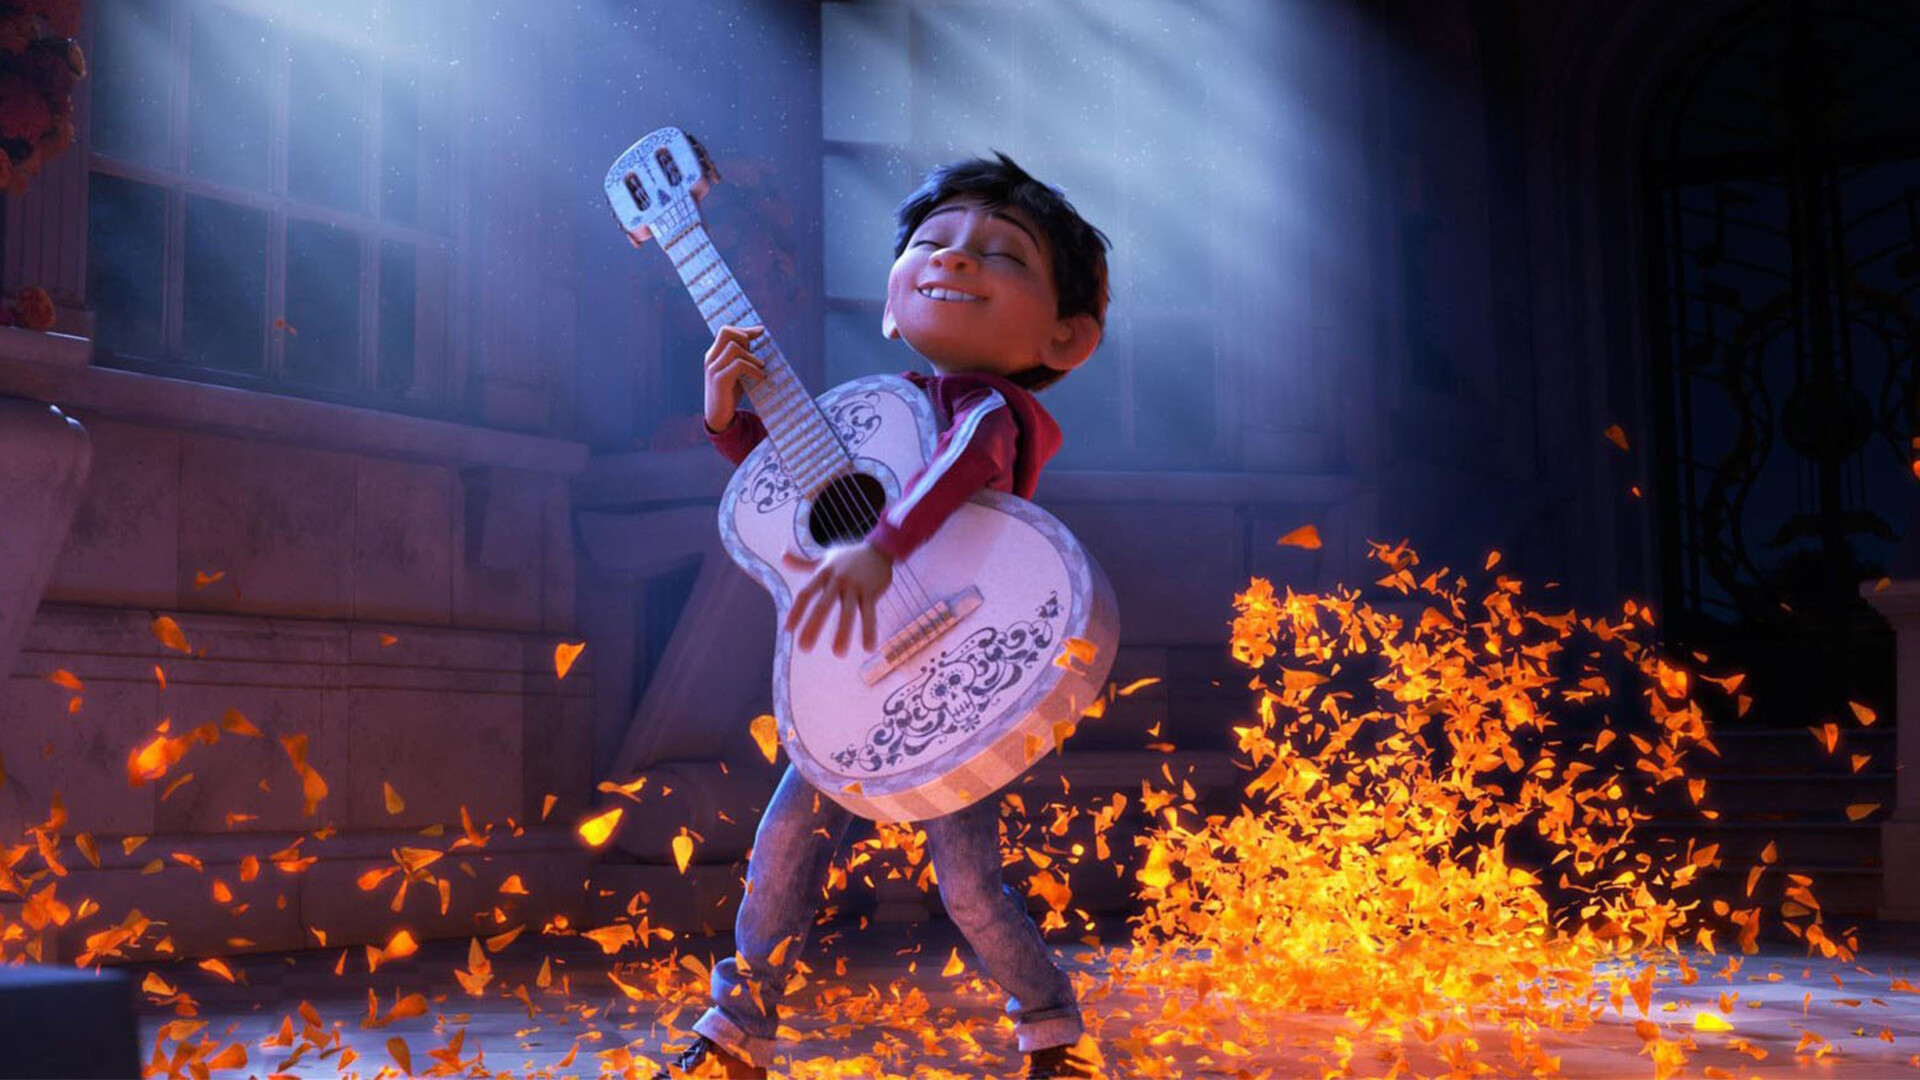 Coco (Cartoon): Aspiring to be like his idol, the celebrated Ernesto de la Cruz, Miguel attempts to “borrow” the deceased star’s guitar to play in a village talent contest. 1920x1080 Full HD Background.